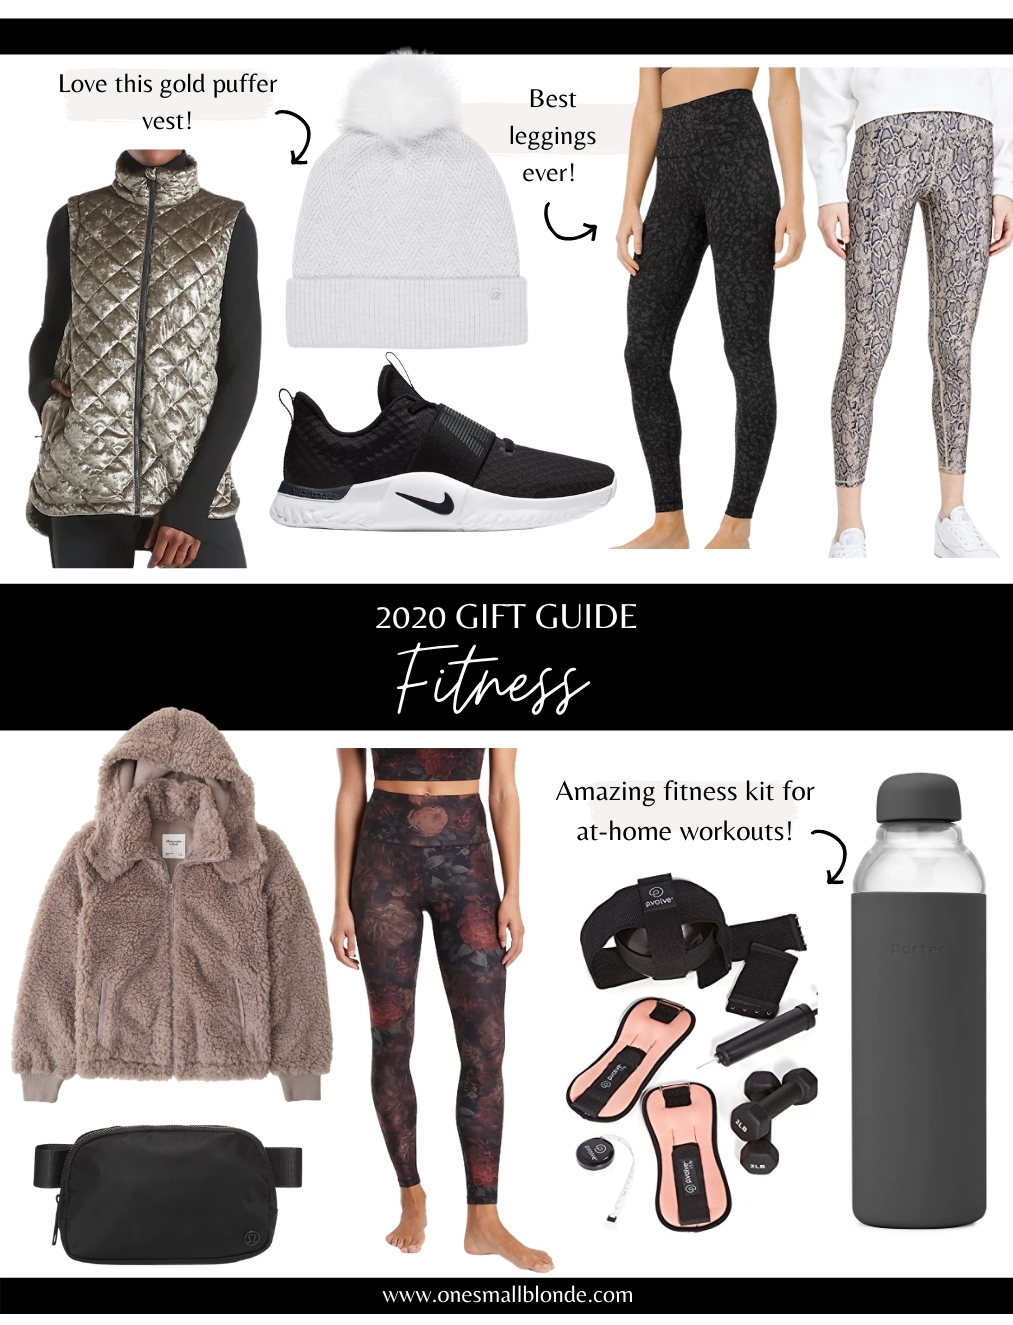 2020 GIFT GUIDE: FITNESS